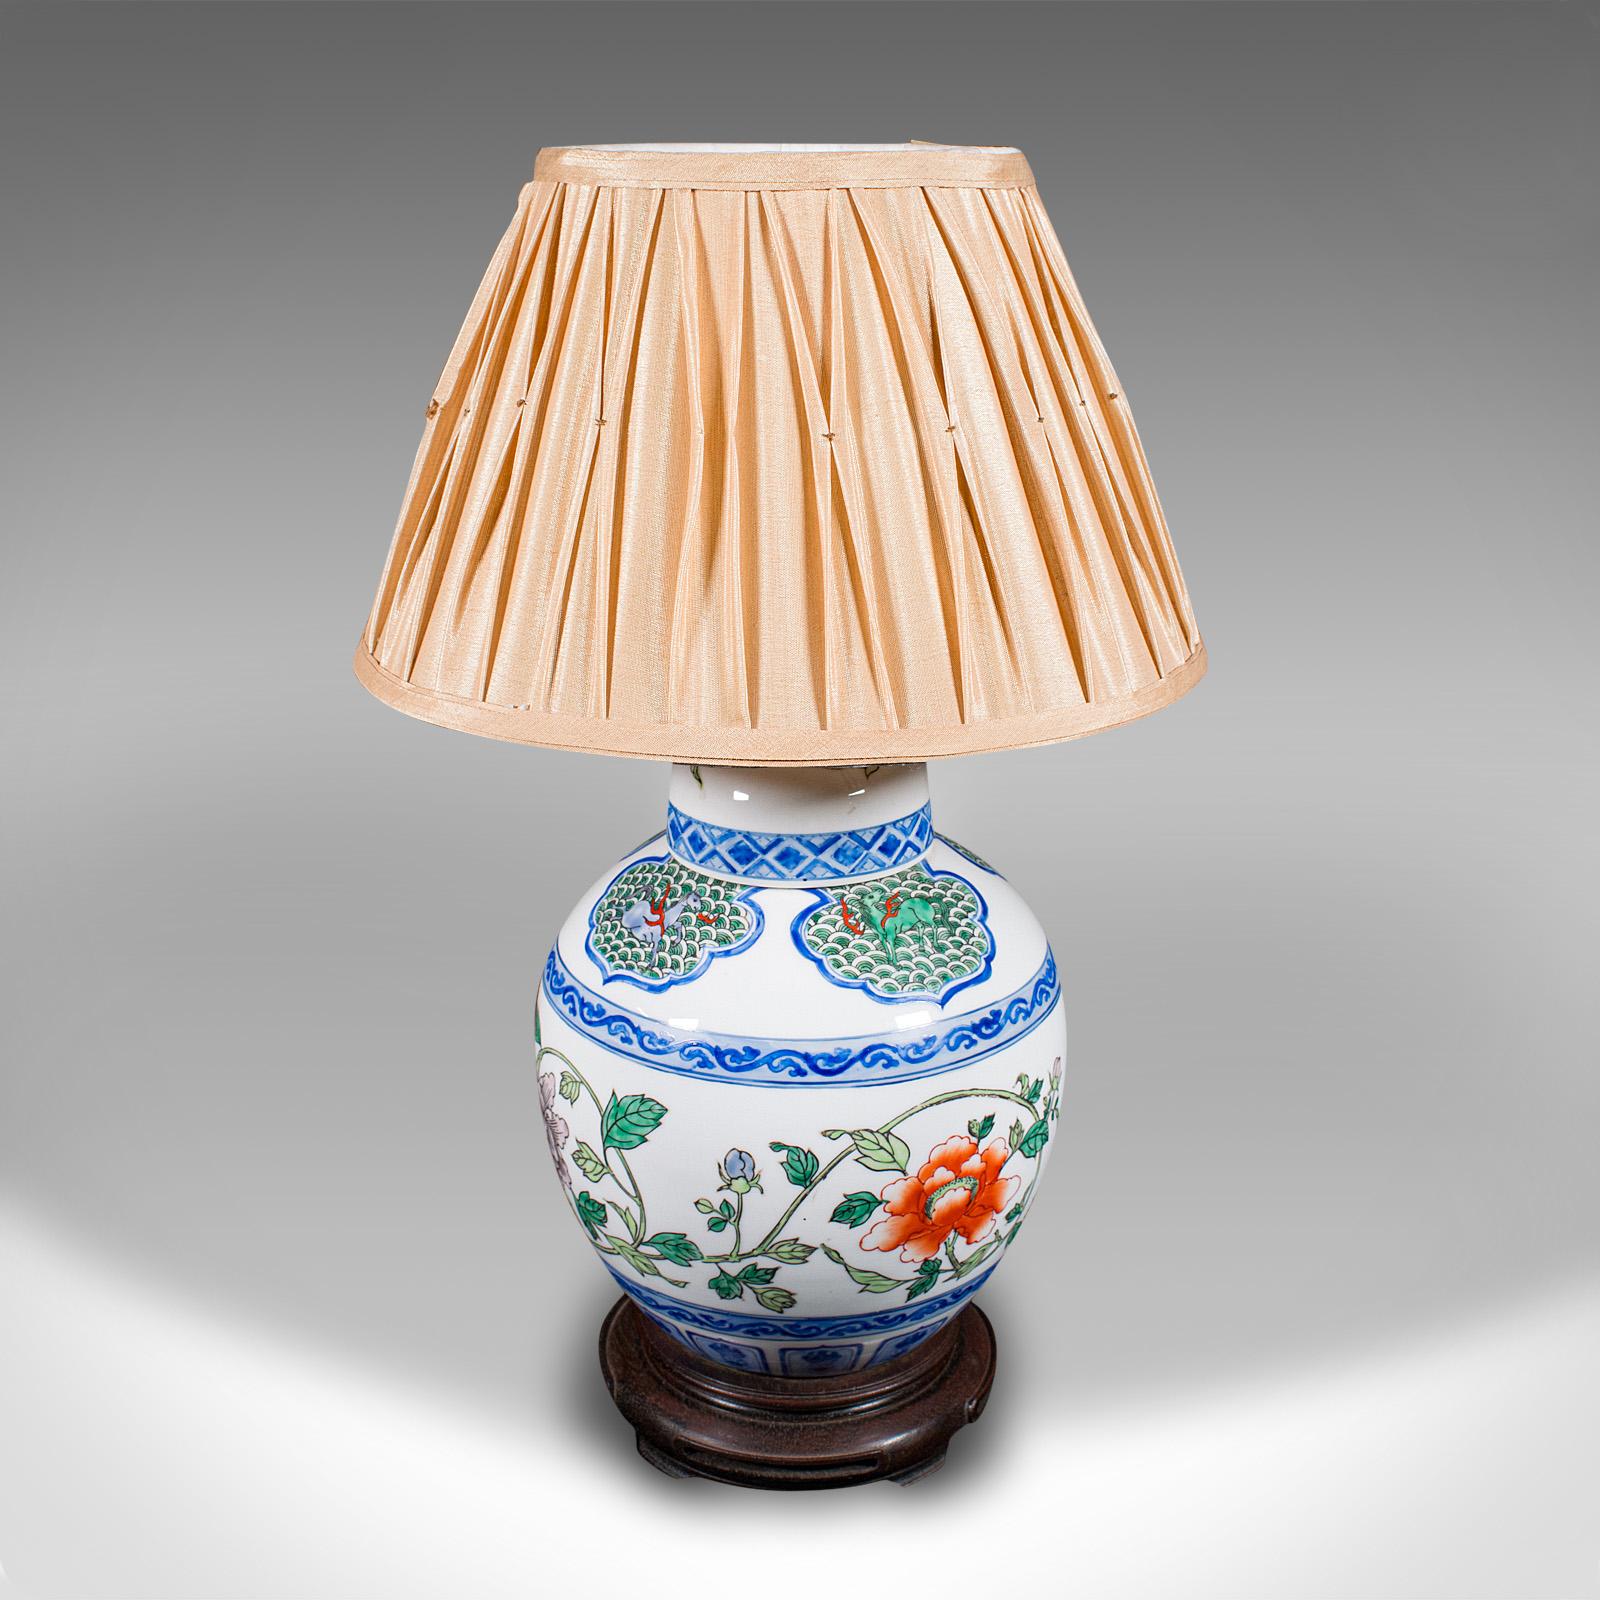 This is a vintage Art Deco table lamp. A Chinese, ceramic accent light, dating to the mid 20th century, circa 1950.

Cheerful Oriental Art Deco taste with a colourful finish
Displaying a desirable aged patina and in good order
Quality white ceramic